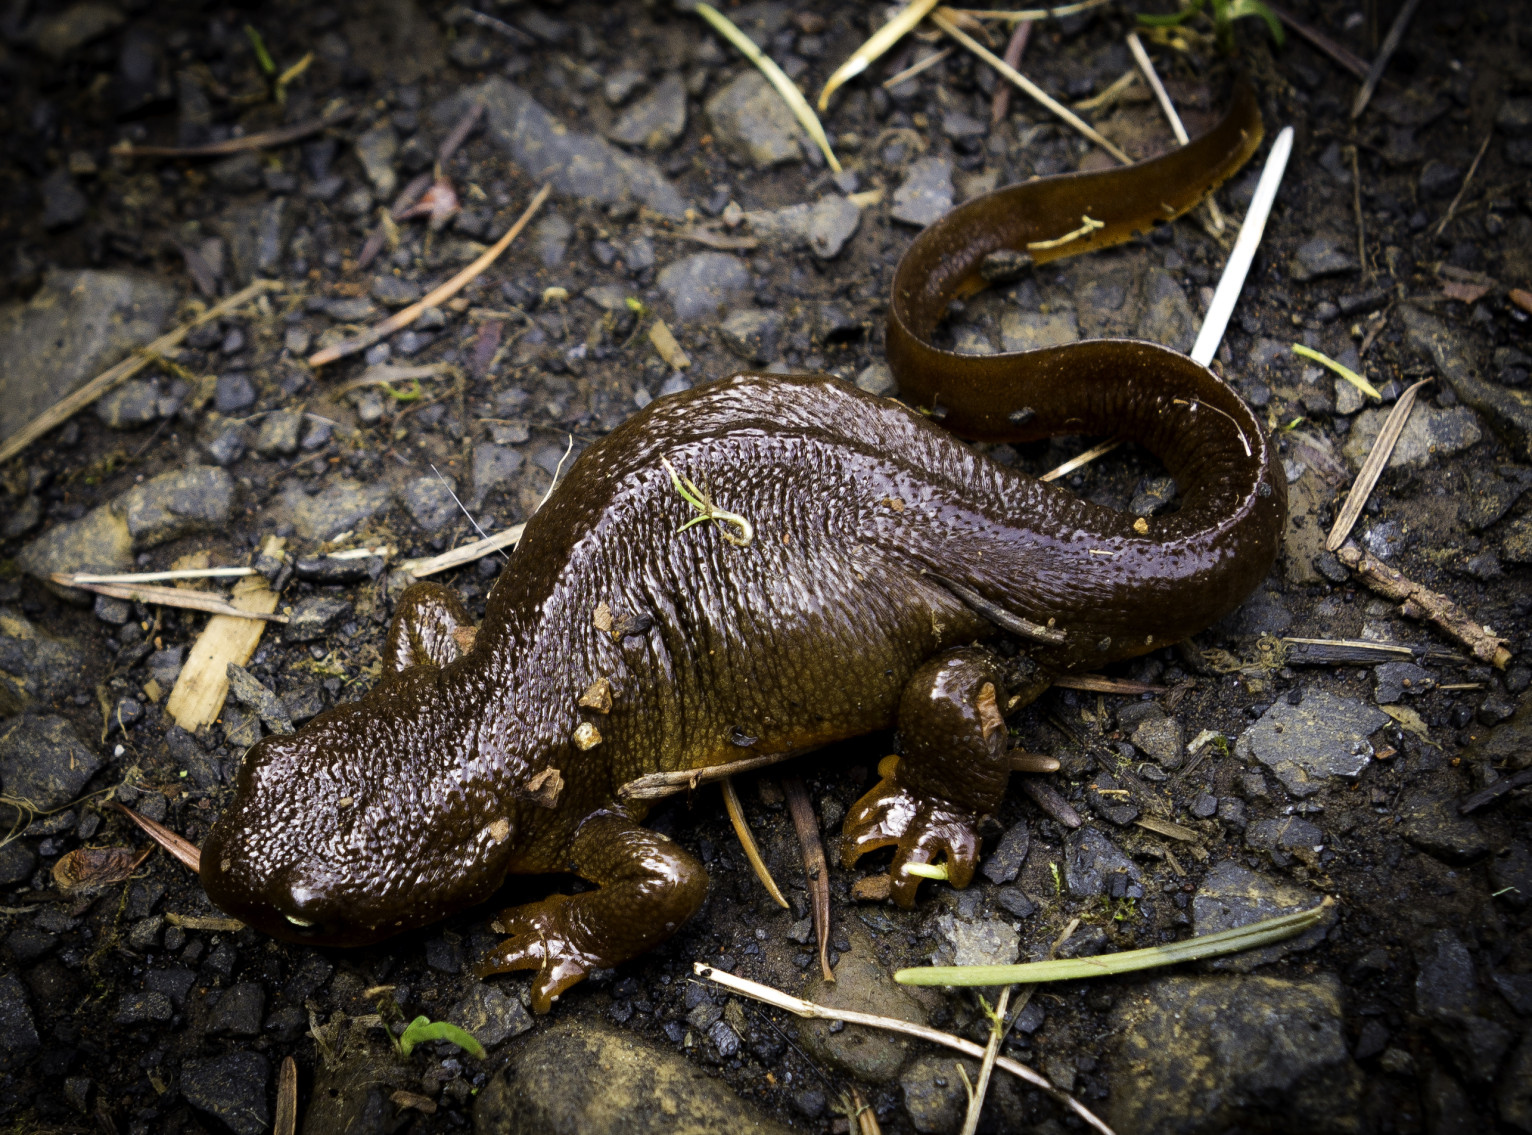 salamander on annual migration from forest floor to mating pool — Oregon old growth forest